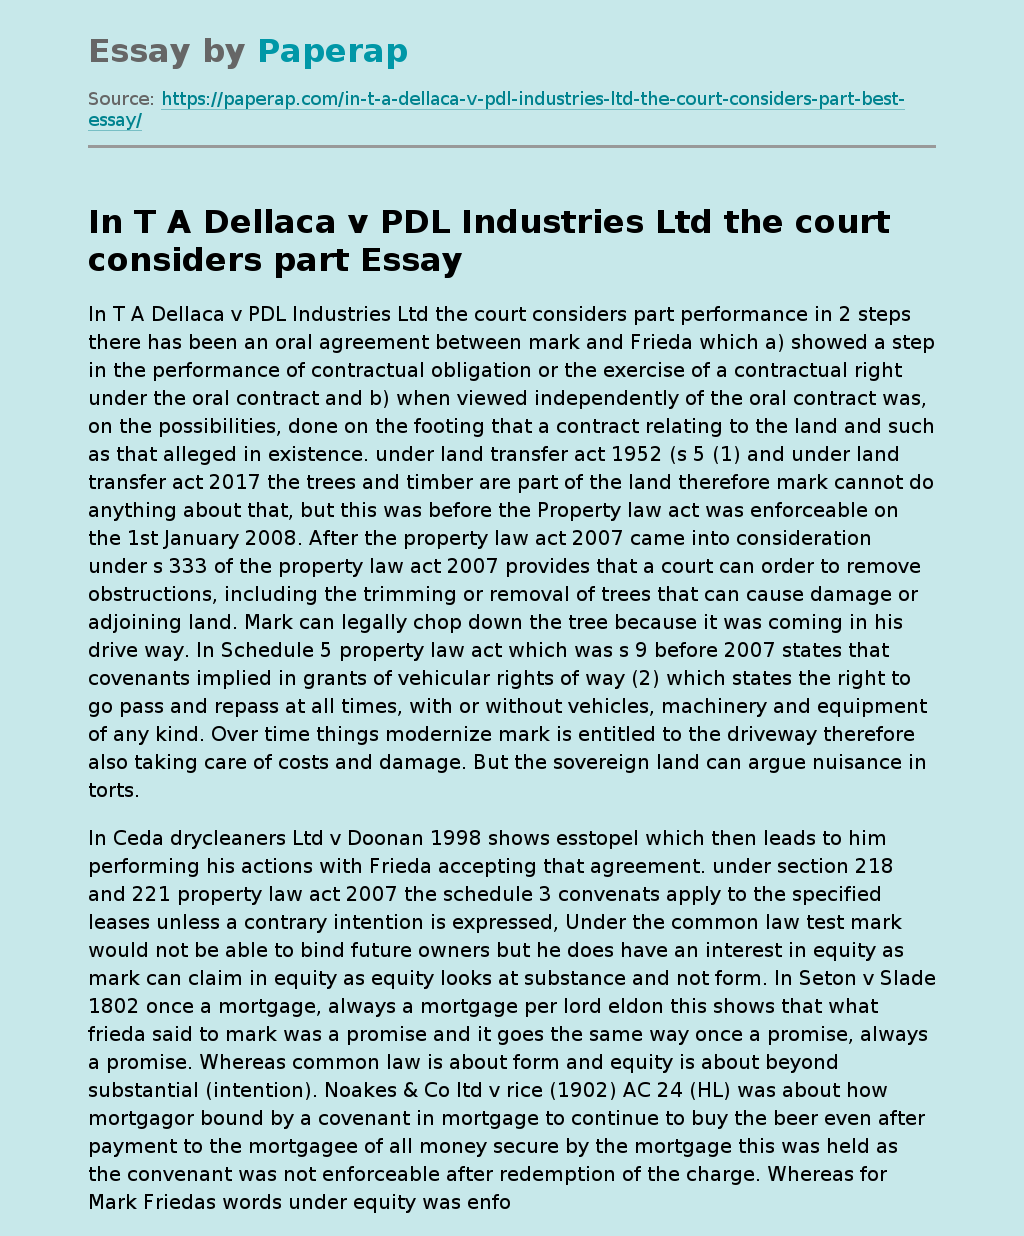 In T A Dellaca v PDL Industries Ltd the court considers part